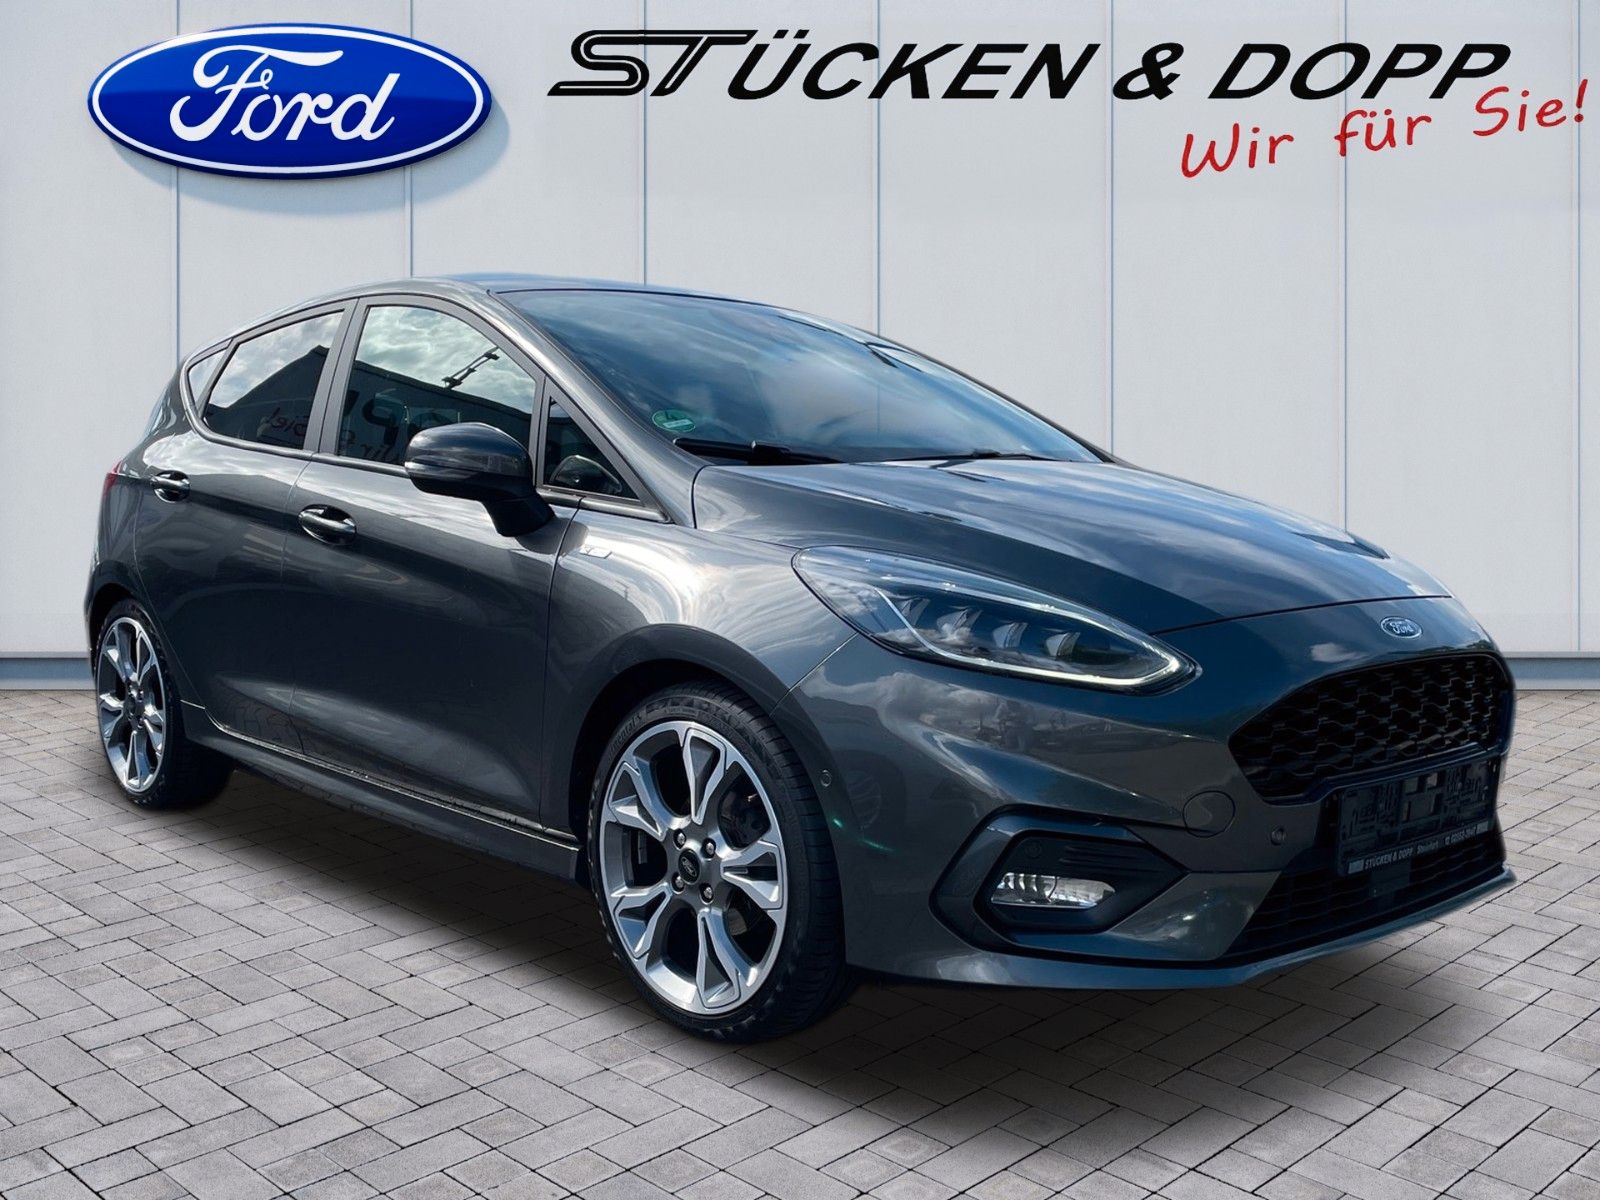 Ford Fiesta 1.0 EcoBoost ST-Line+ACC+LED+18 Zoll+...